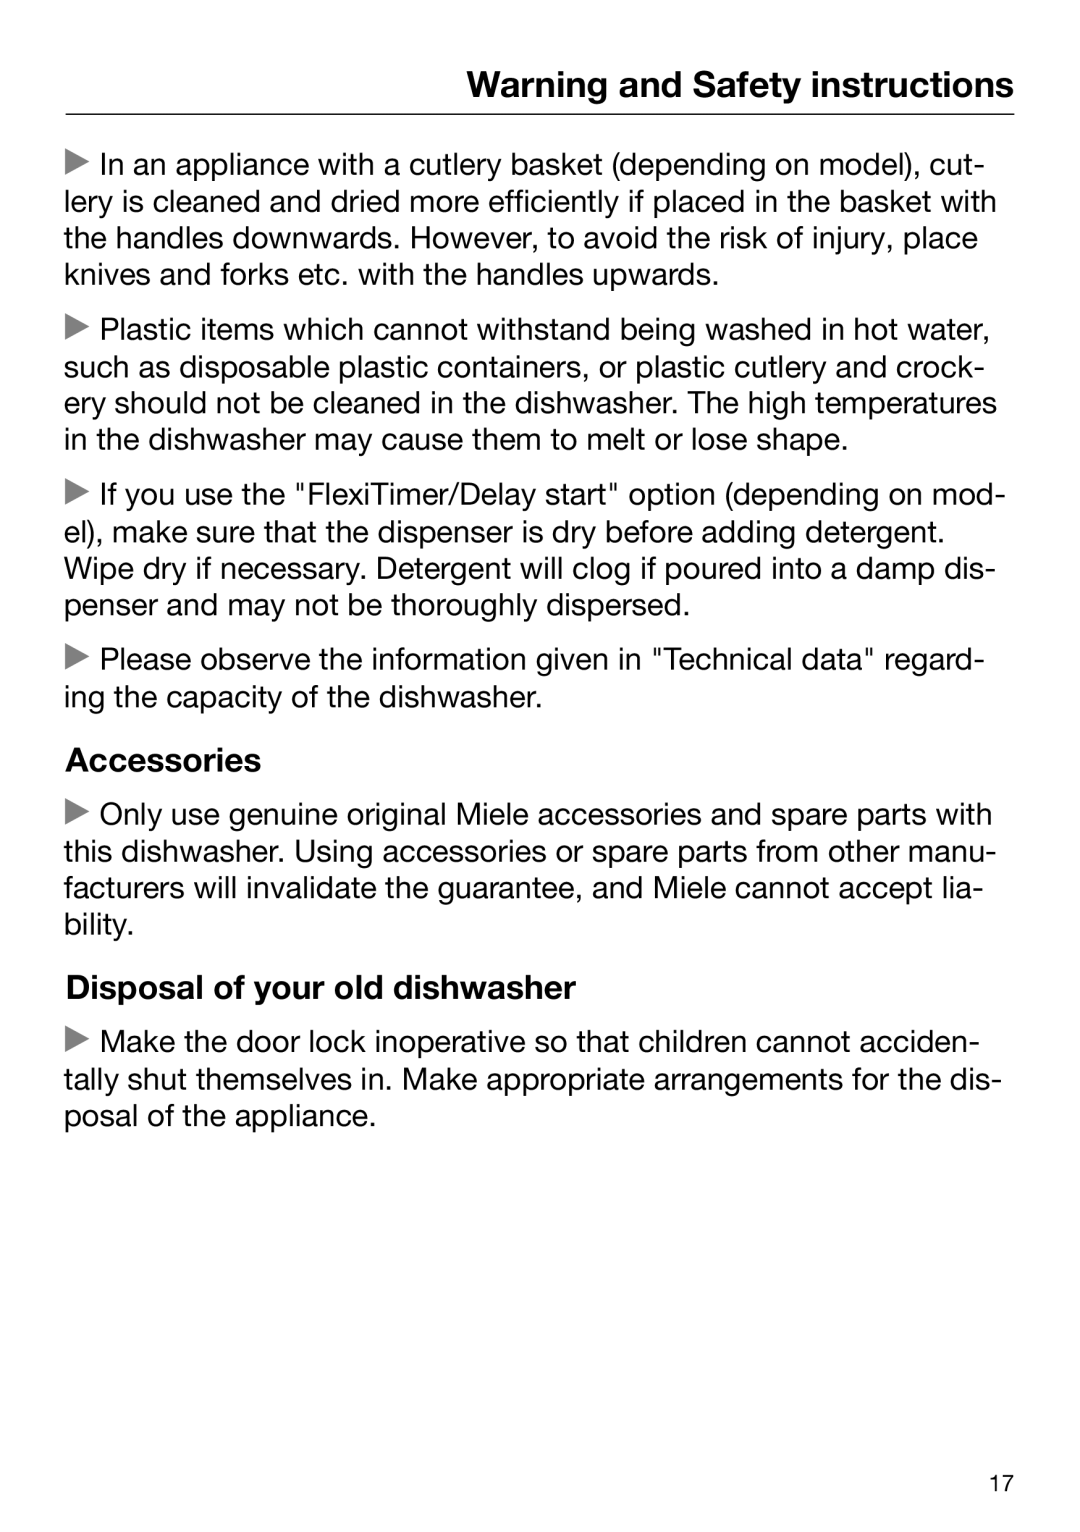 Miele 09 645 470 manual Accessories, Disposal of your old dishwasher, Warning and Safety instructions 